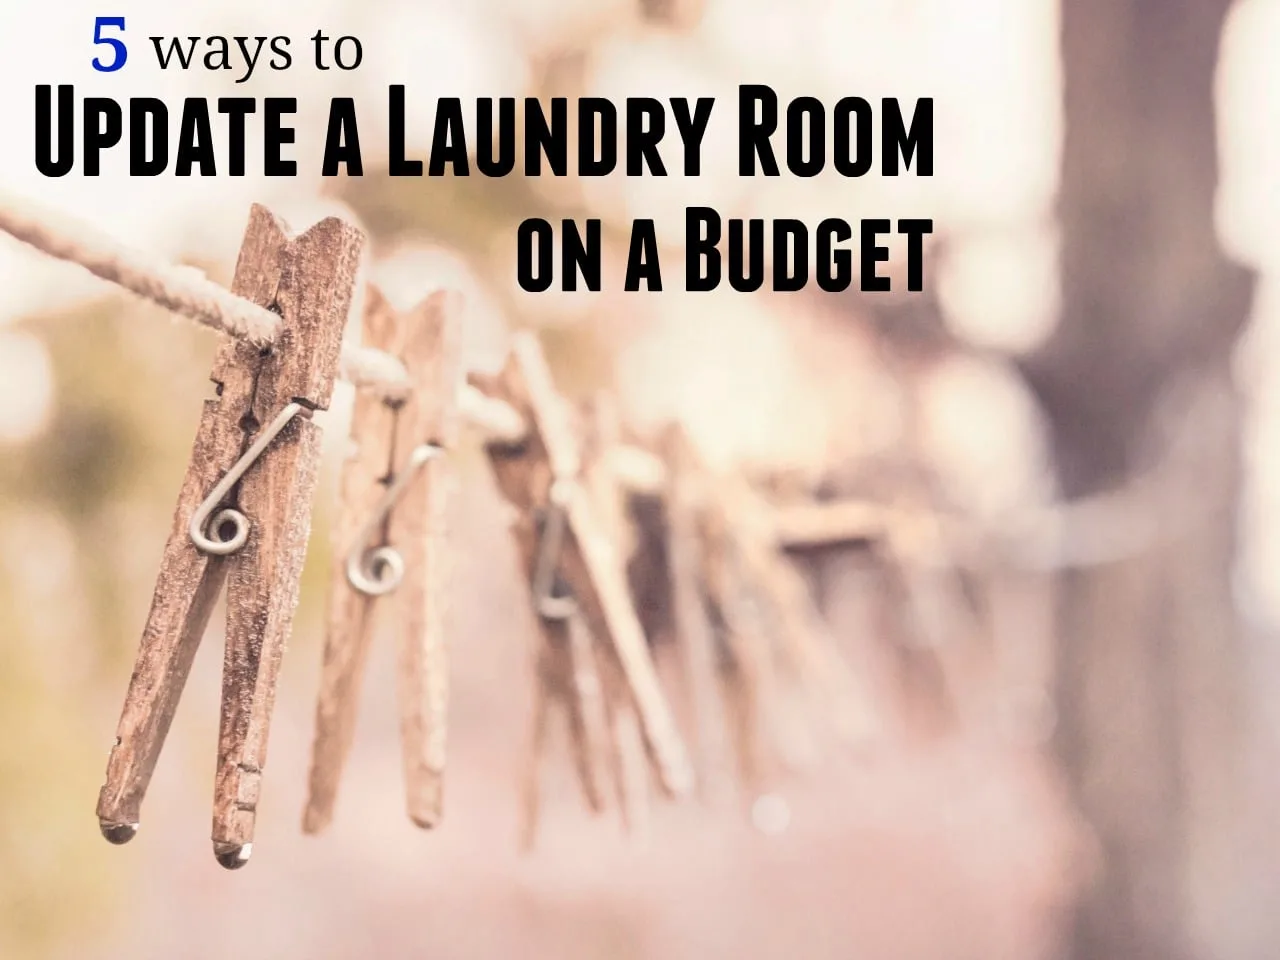 Update Your Laundry Room on a Budget